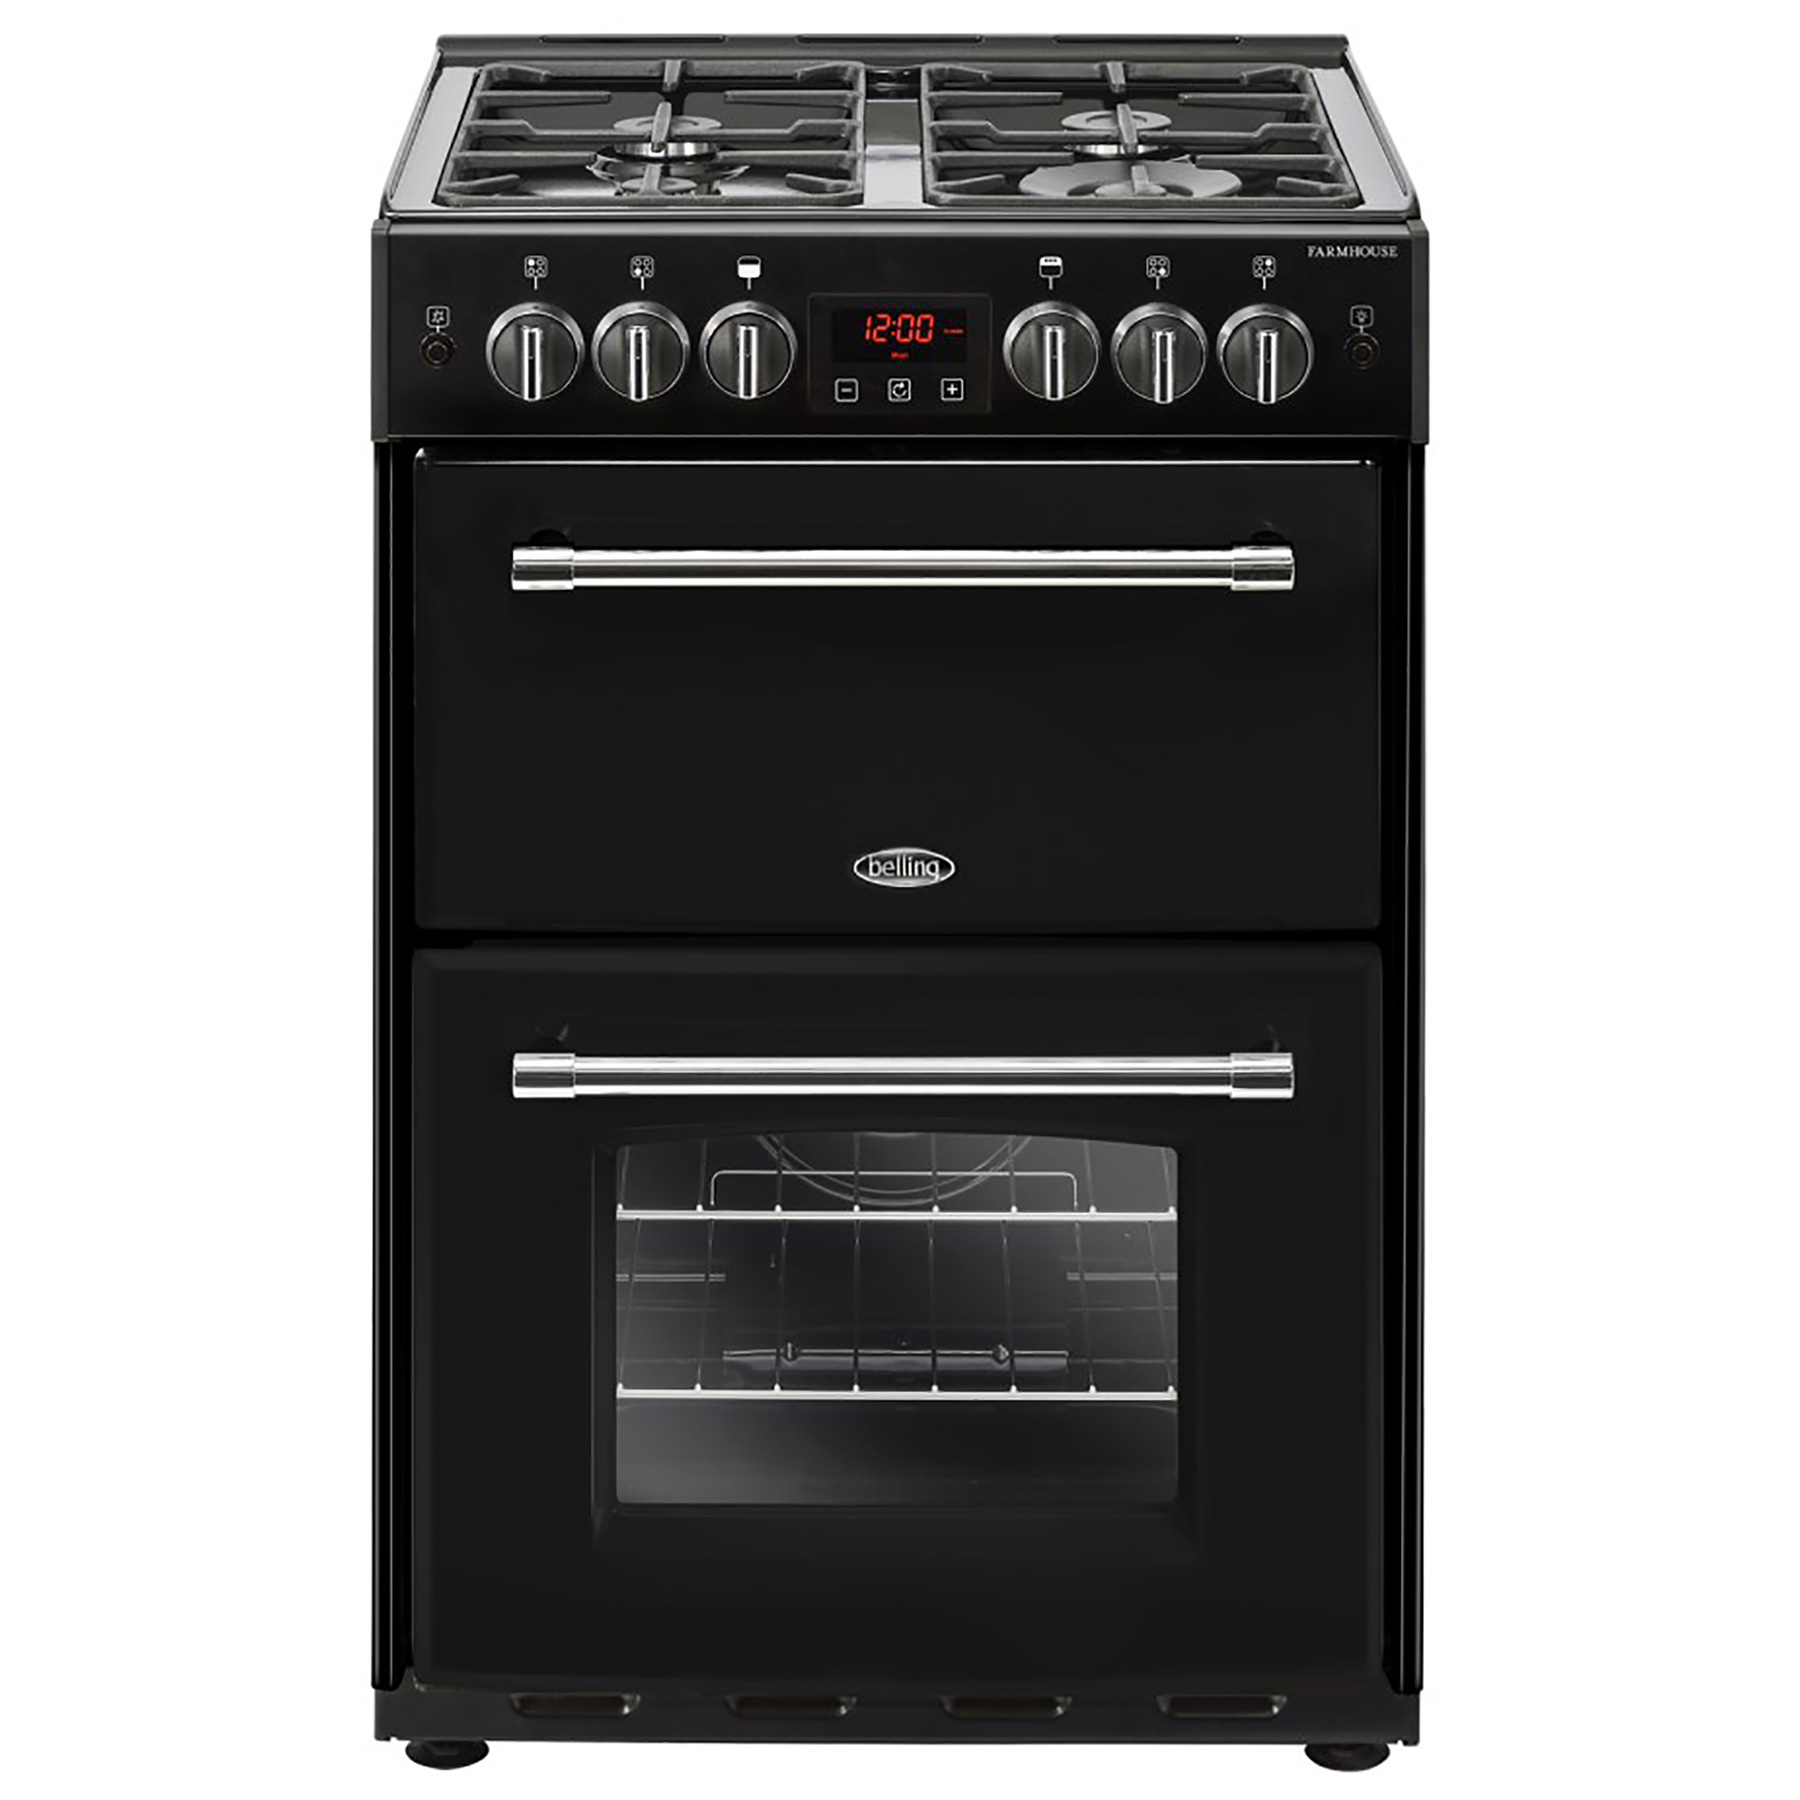 Image of Belling 444444717 60cm Farmhouse 60G Double Oven Gas Cooker in Black